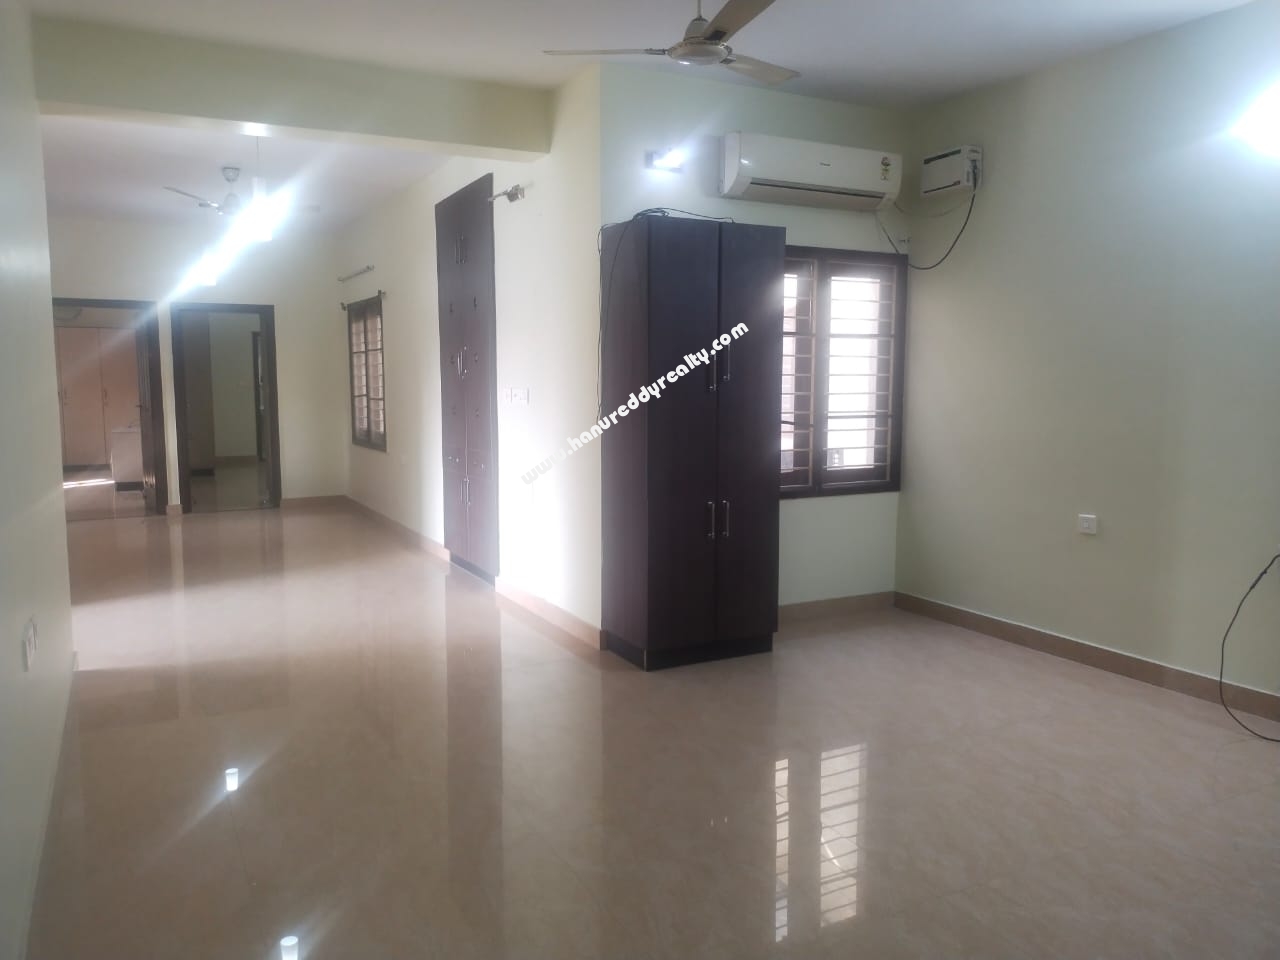 Three Bed room Apartment for resale at South Avenue Thiruvanmiyur ...